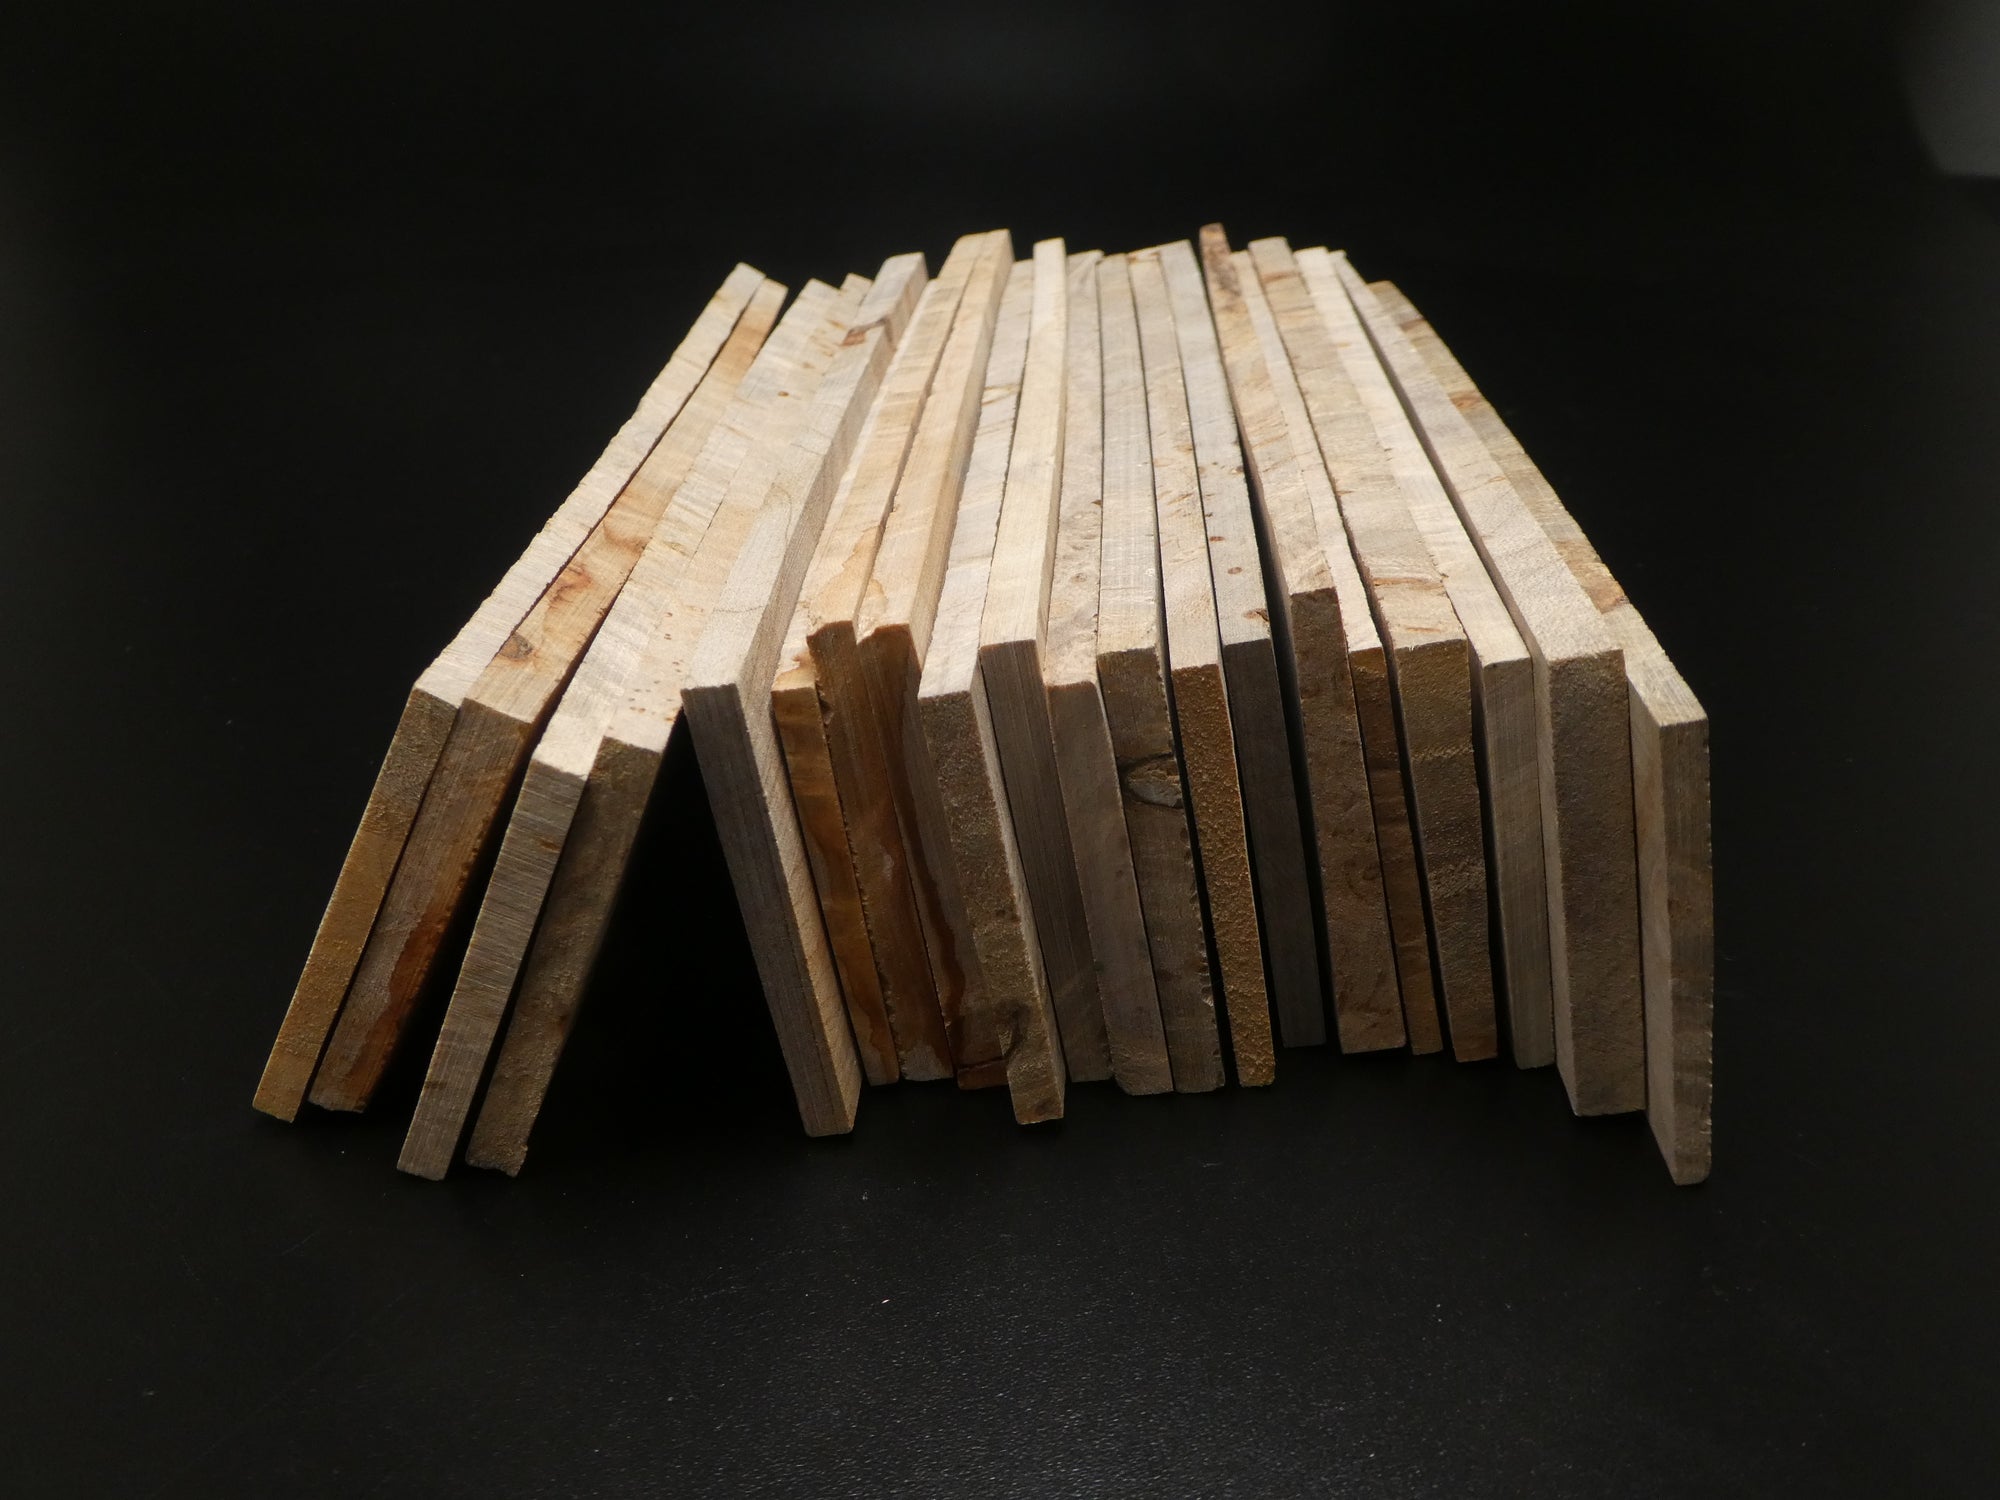 Natural Specialty Blanks